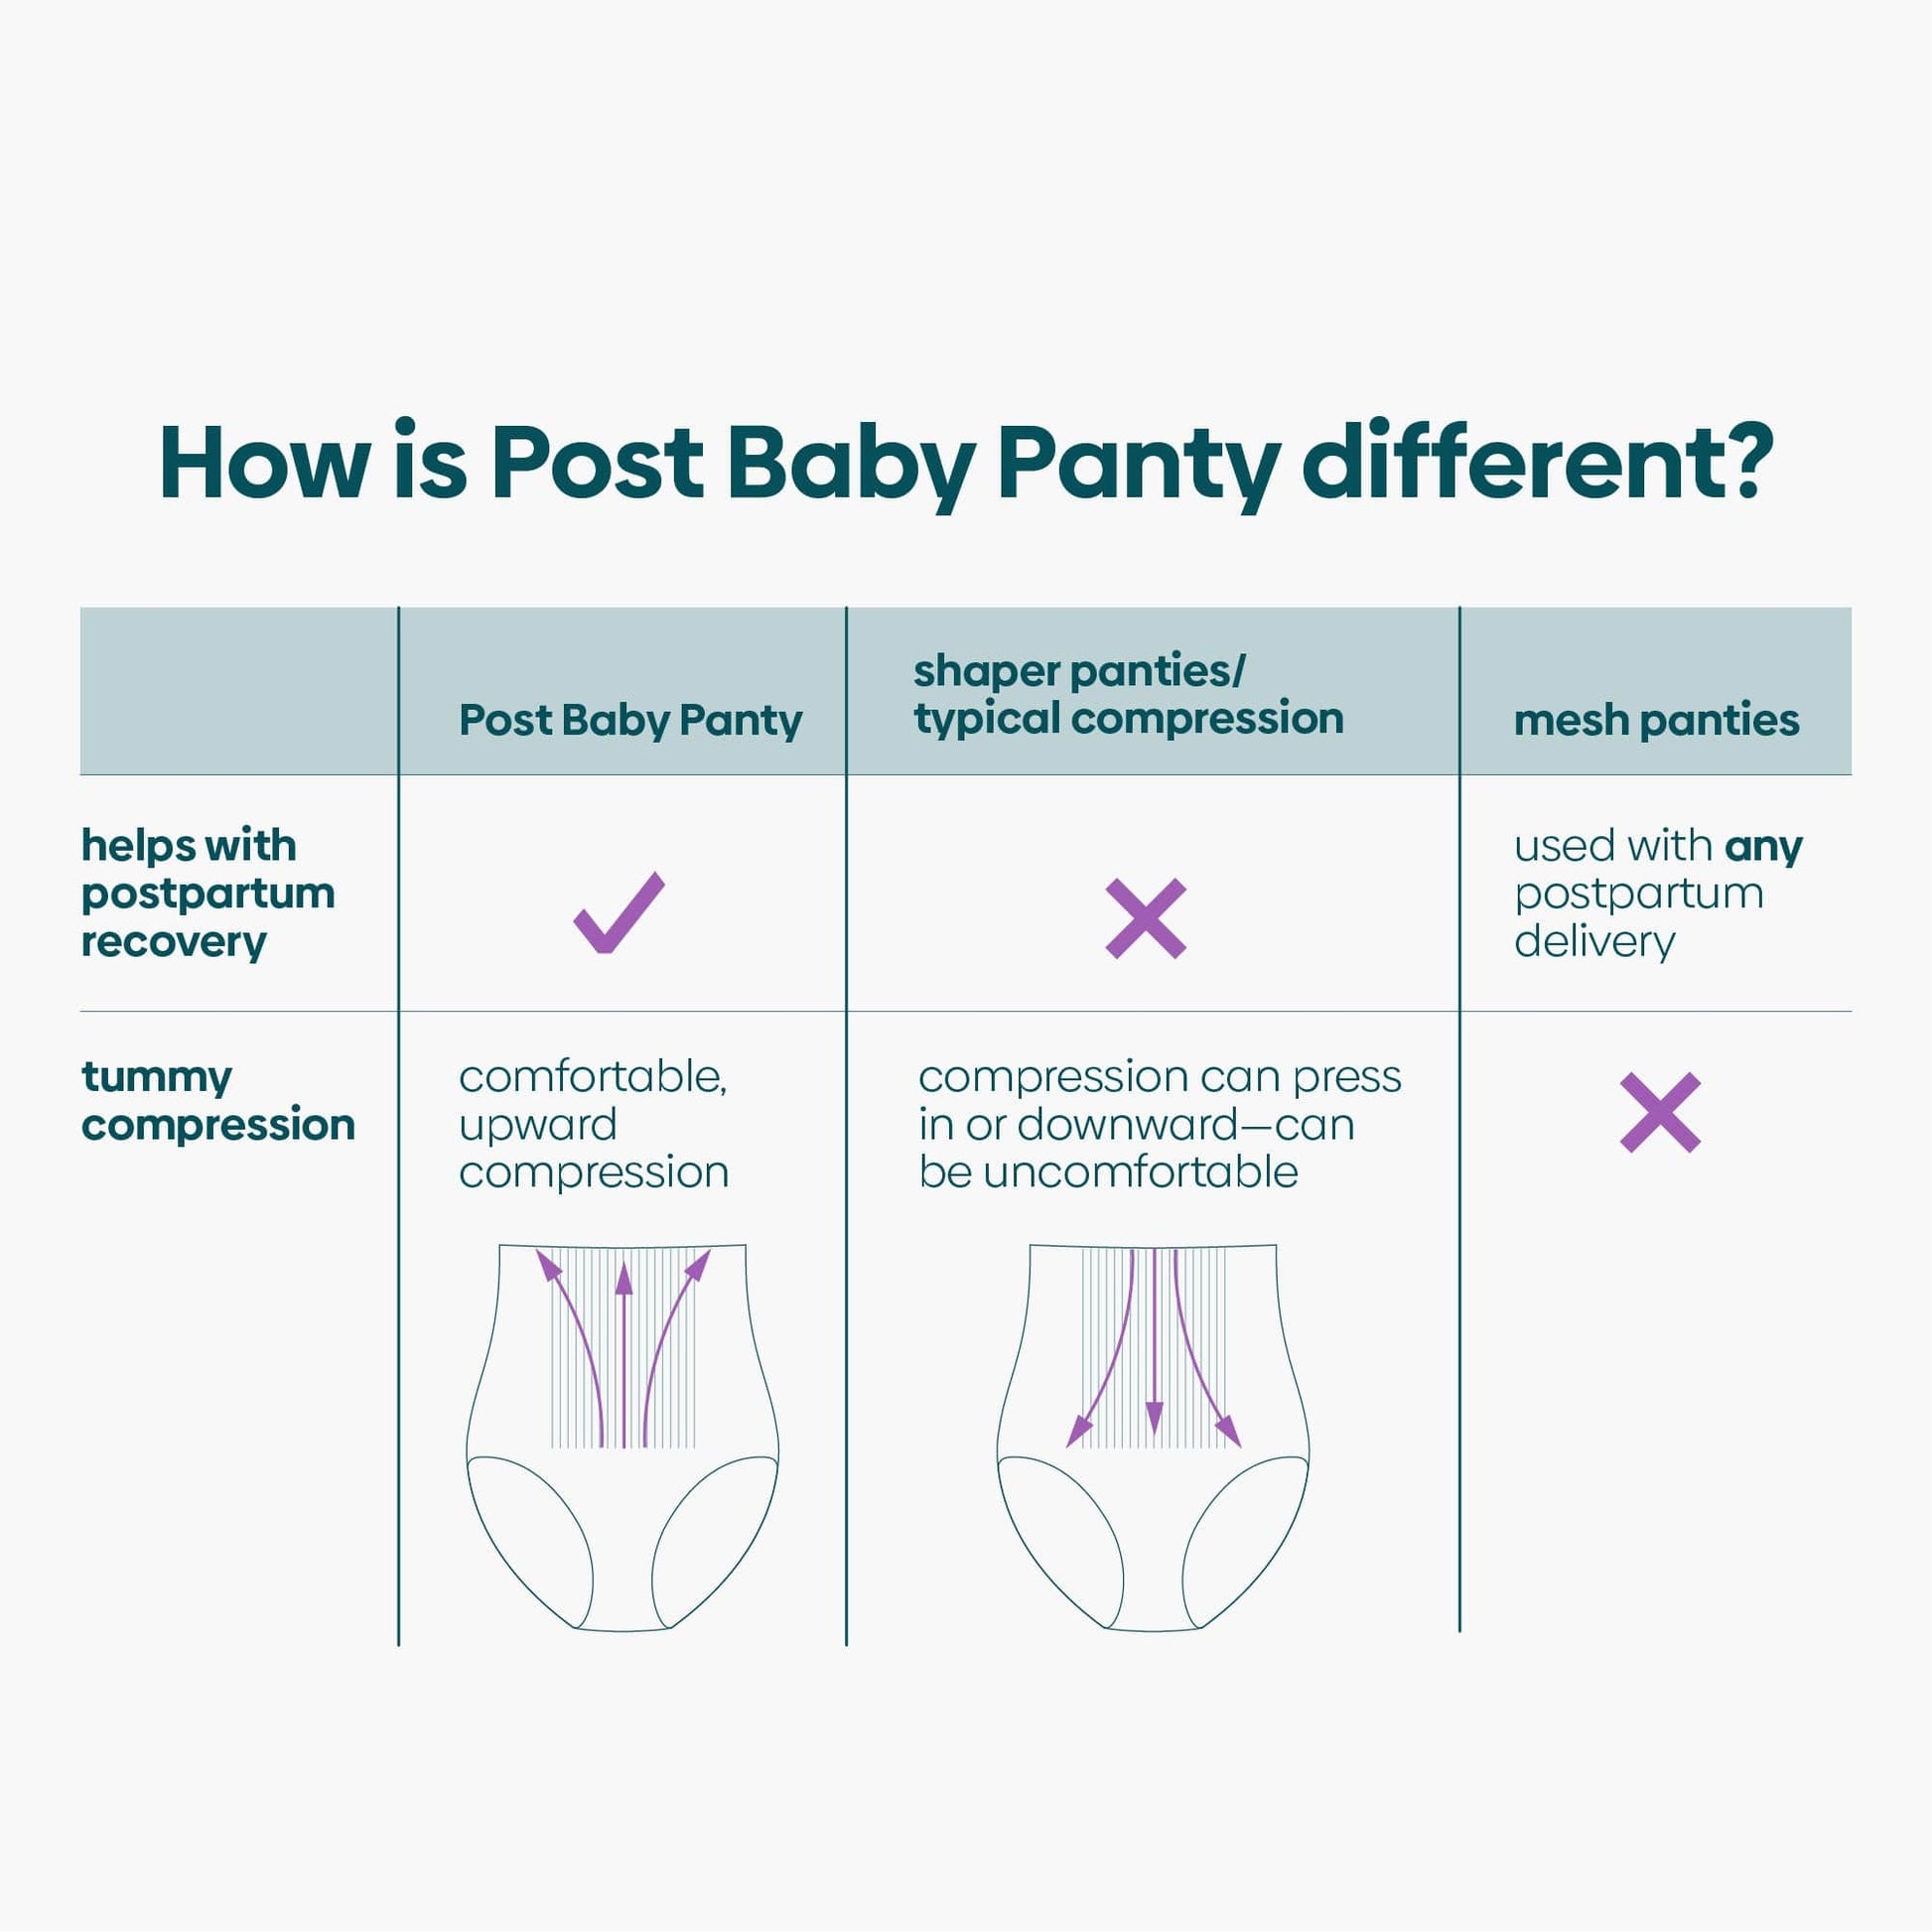 A comparison chart for Post Baby Panty and other postpartum products